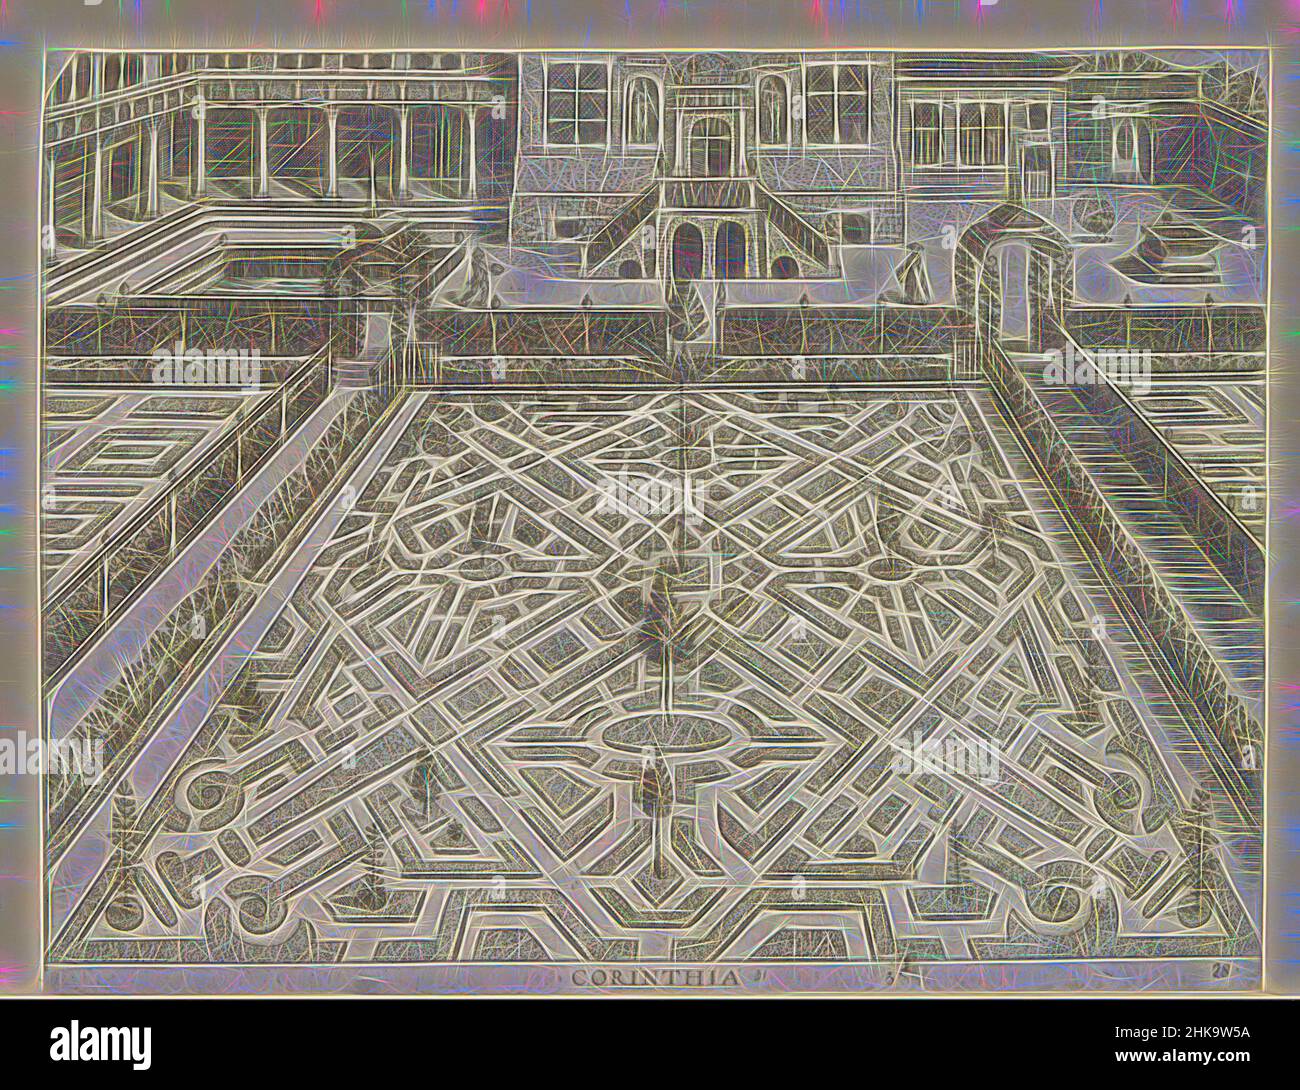 Inspired by Garden with a parterre with in the diagonals compartments in the form of columns, Corinthia, Hortorum Viridariorumque elegantes et multiplicis formae, Garden designs associated with the Doric, Ionic and Corinthian building orders, Garden with a parterre with in the diagonals compartments, Reimagined by Artotop. Classic art reinvented with a modern twist. Design of warm cheerful glowing of brightness and light ray radiance. Photography inspired by surrealism and futurism, embracing dynamic energy of modern technology, movement, speed and revolutionize culture Stock Photo